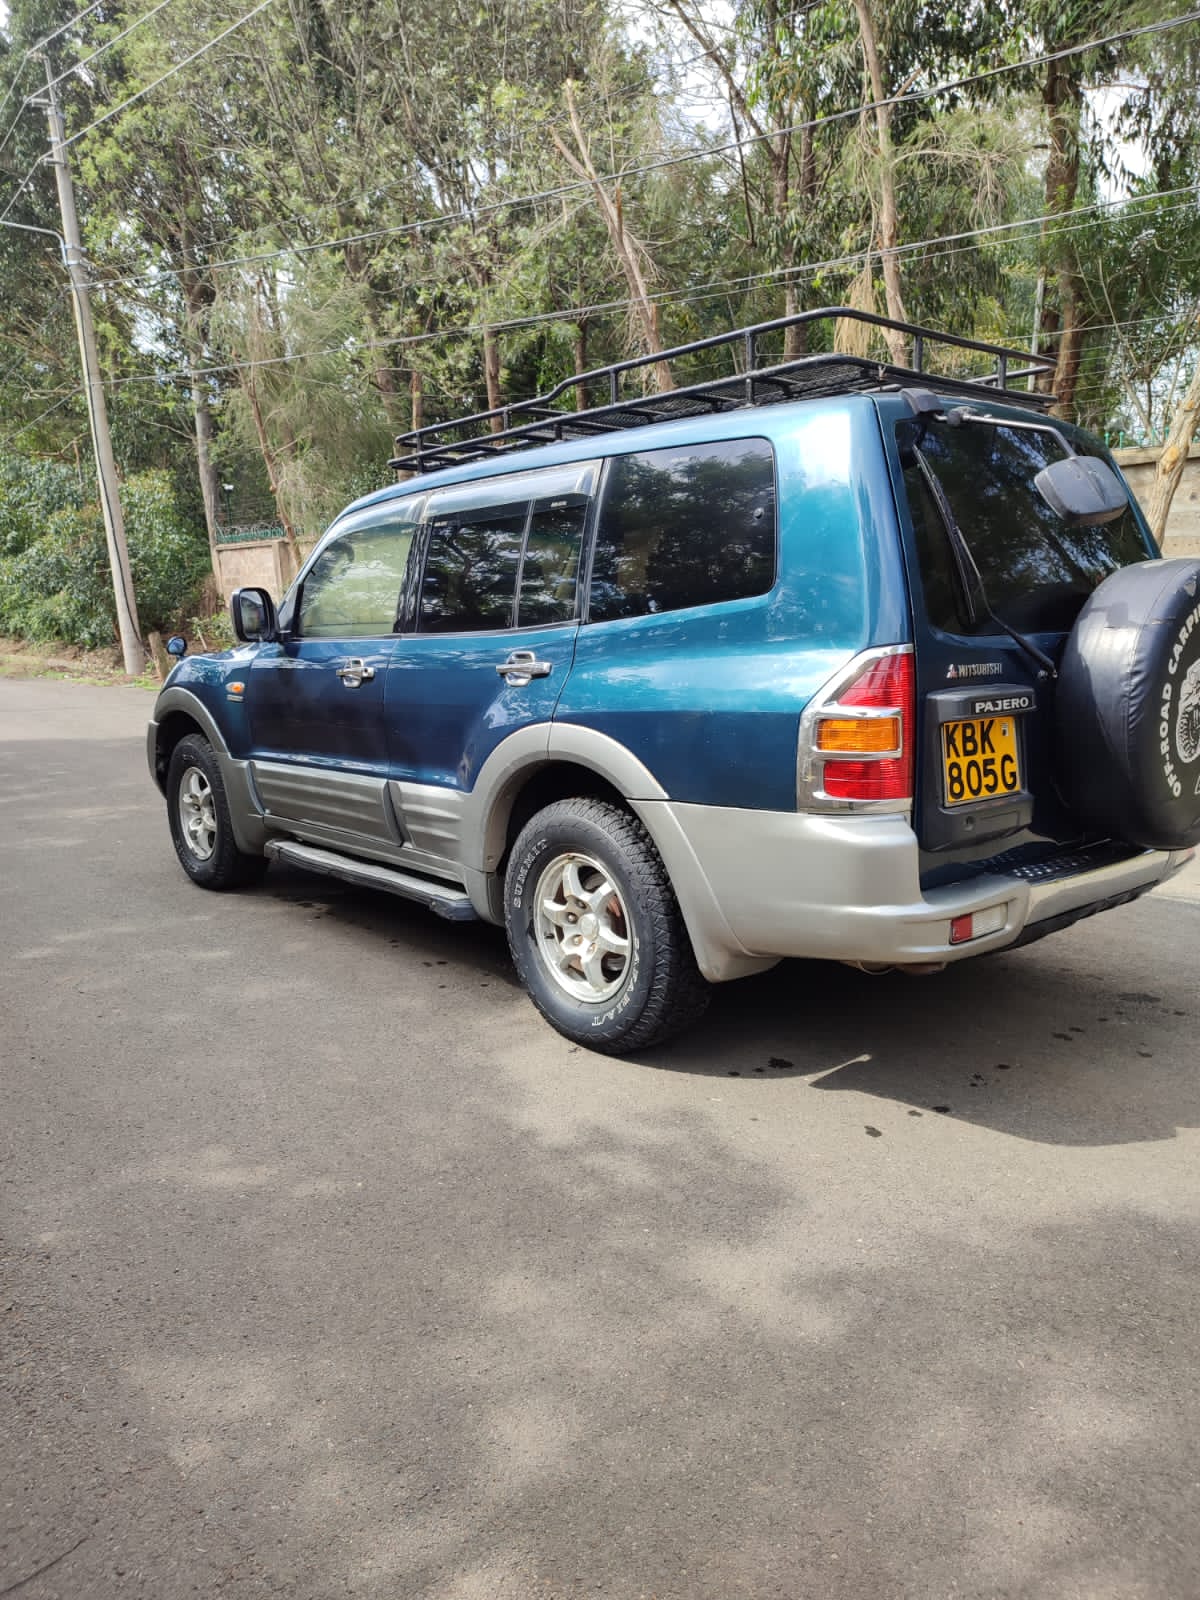 Mitsubishi Pajero Super Exceed SUNROOF You Pay 30% Deposit Trade in Ok Hot Deal